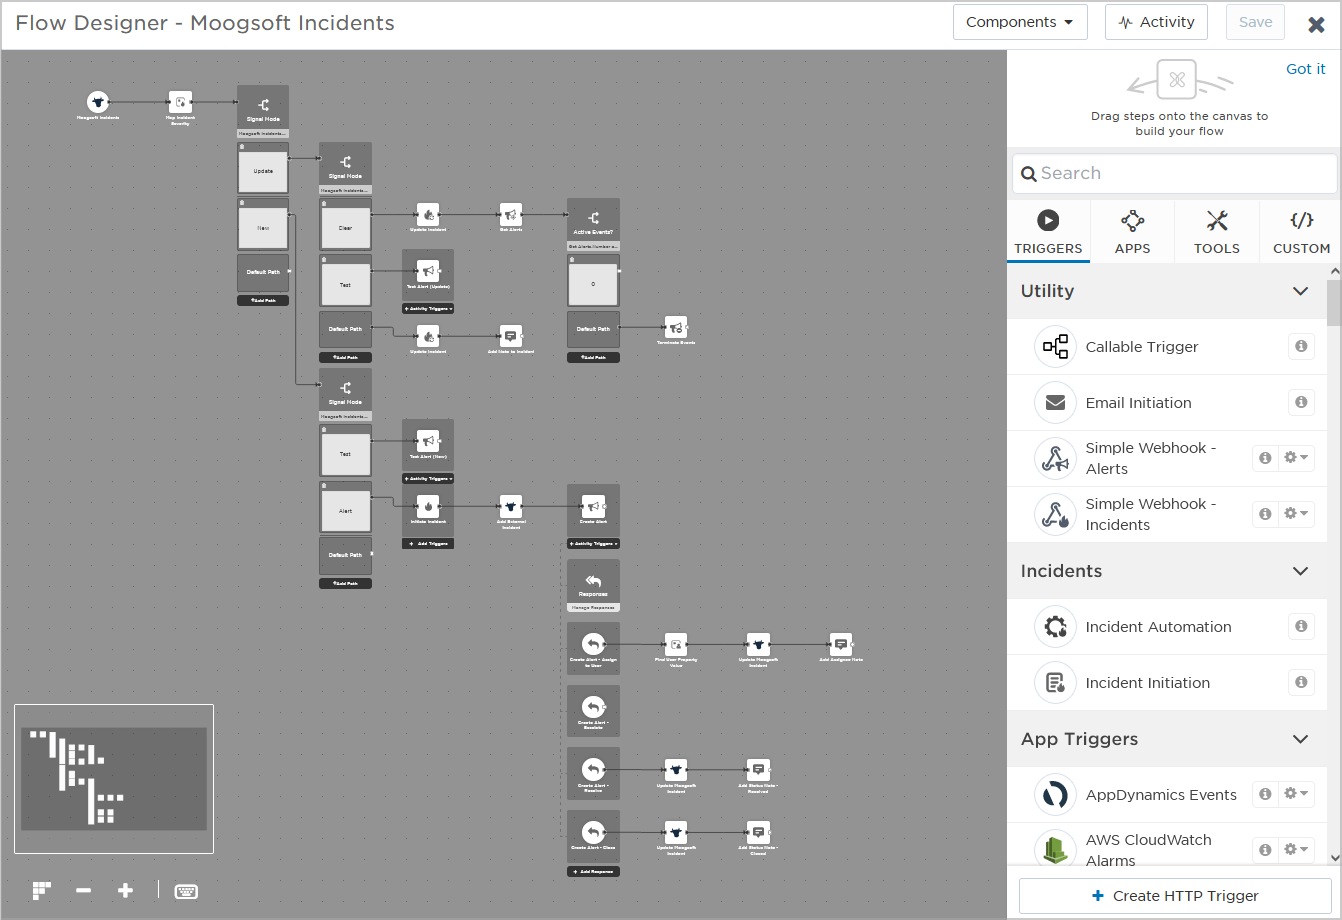 moogsoft-incidents-workflow.png